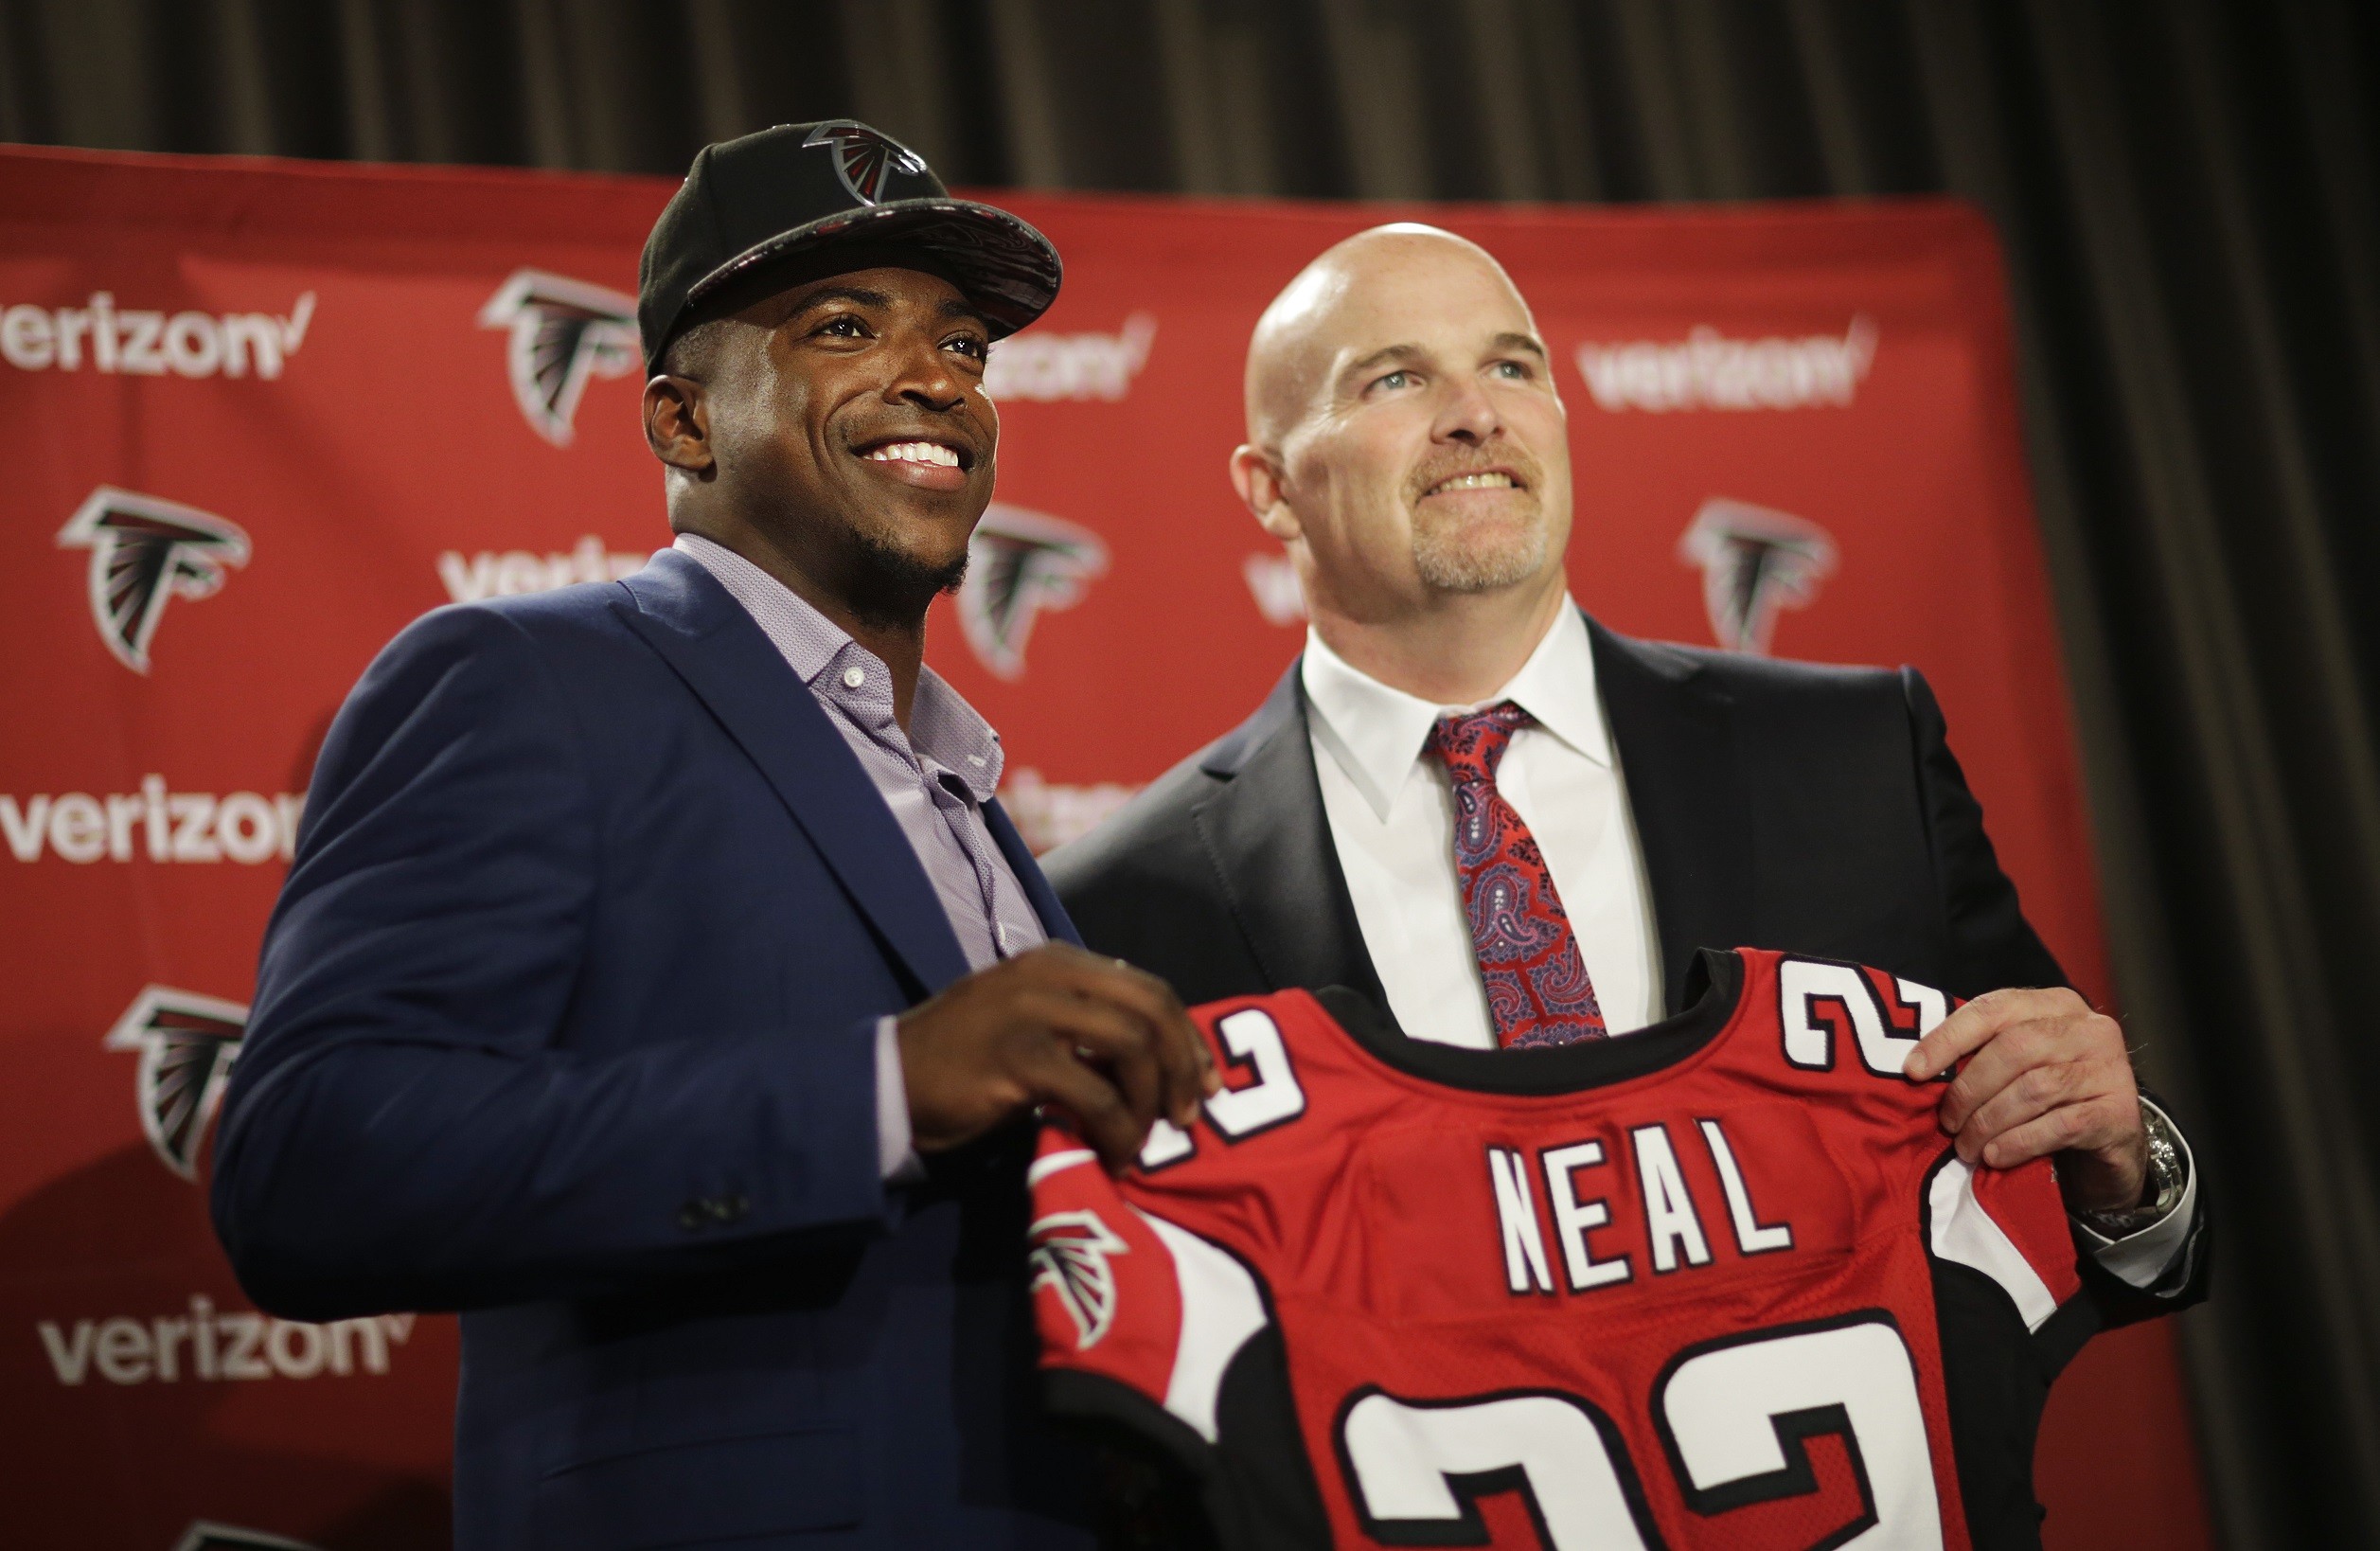 2514x1638 Atlanta Falcons first round draft pick Keanu Neal, left, poses for a photo  with